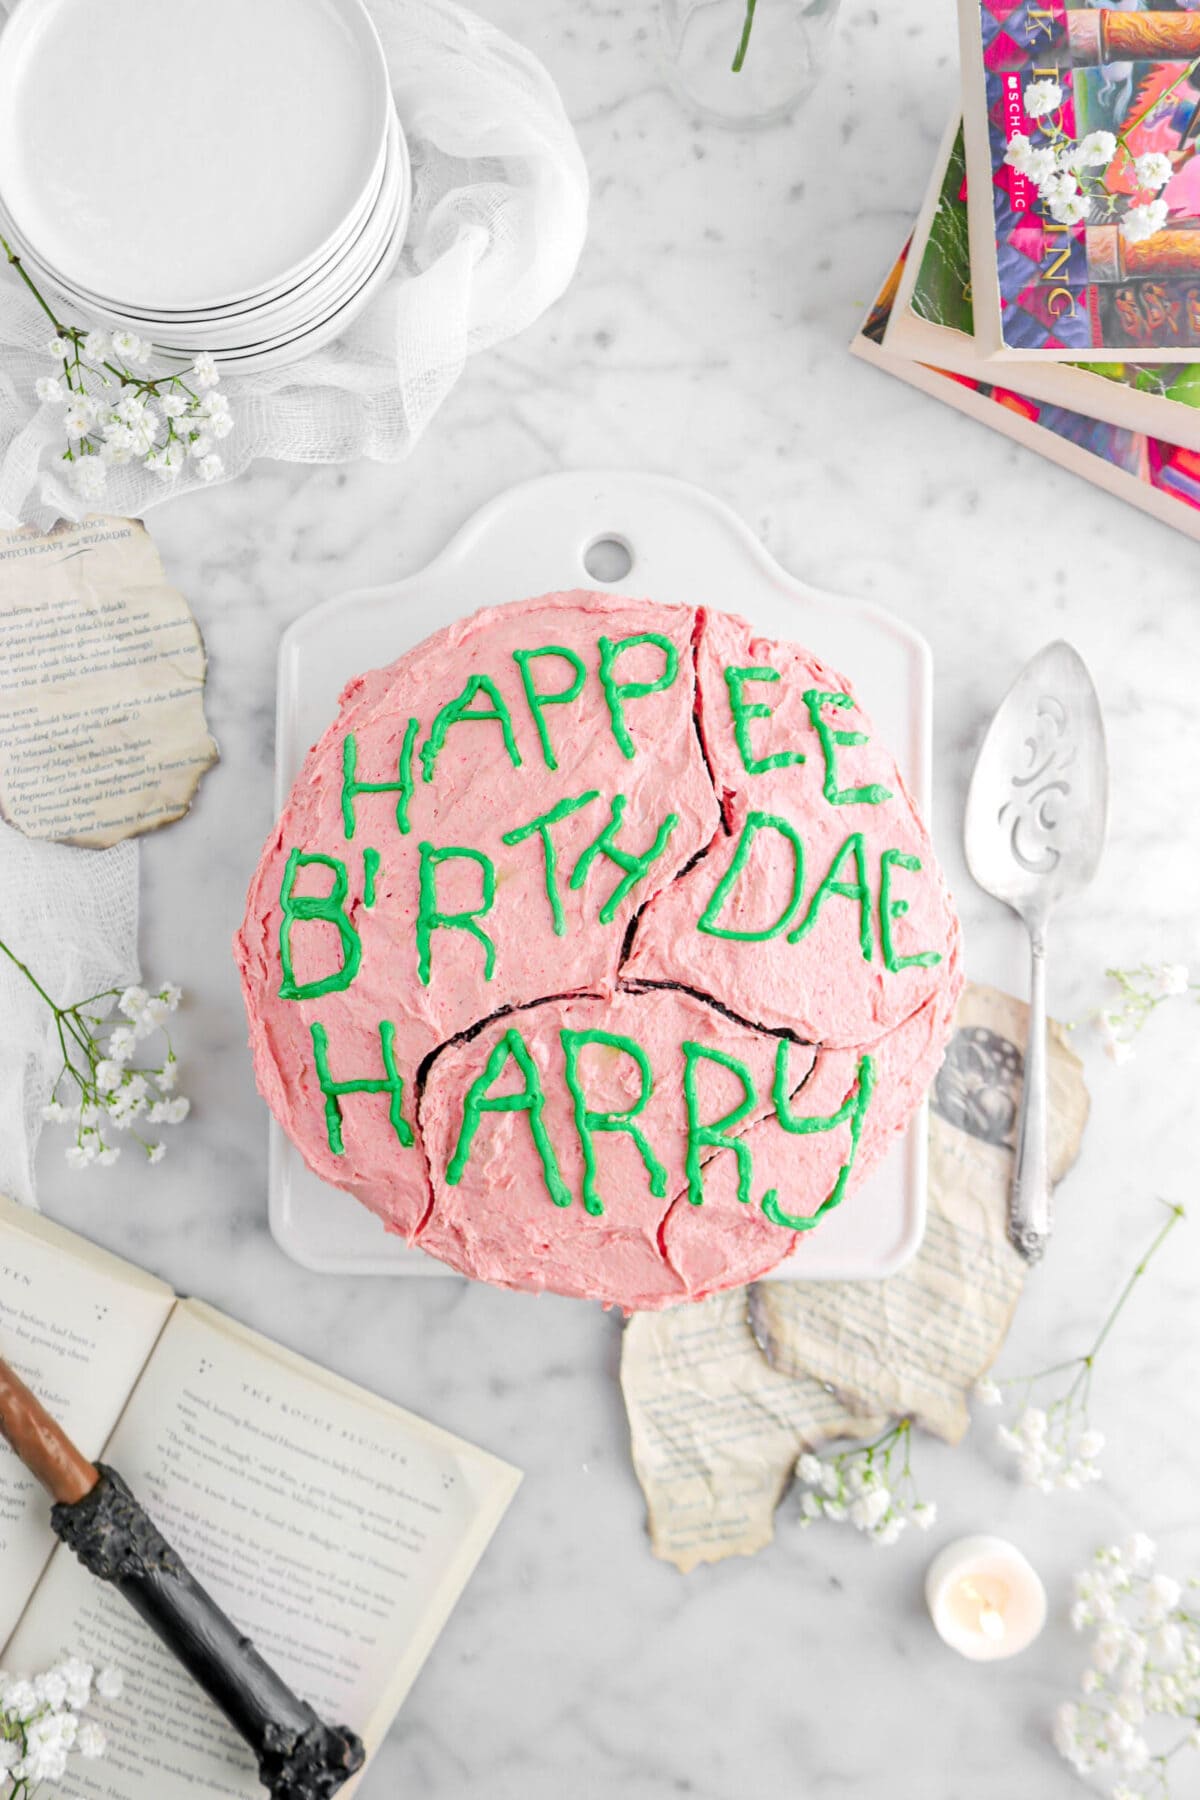 overhead shot of cake reading "happy birthday harry" misspelled in green frosting with book pages and flowers around